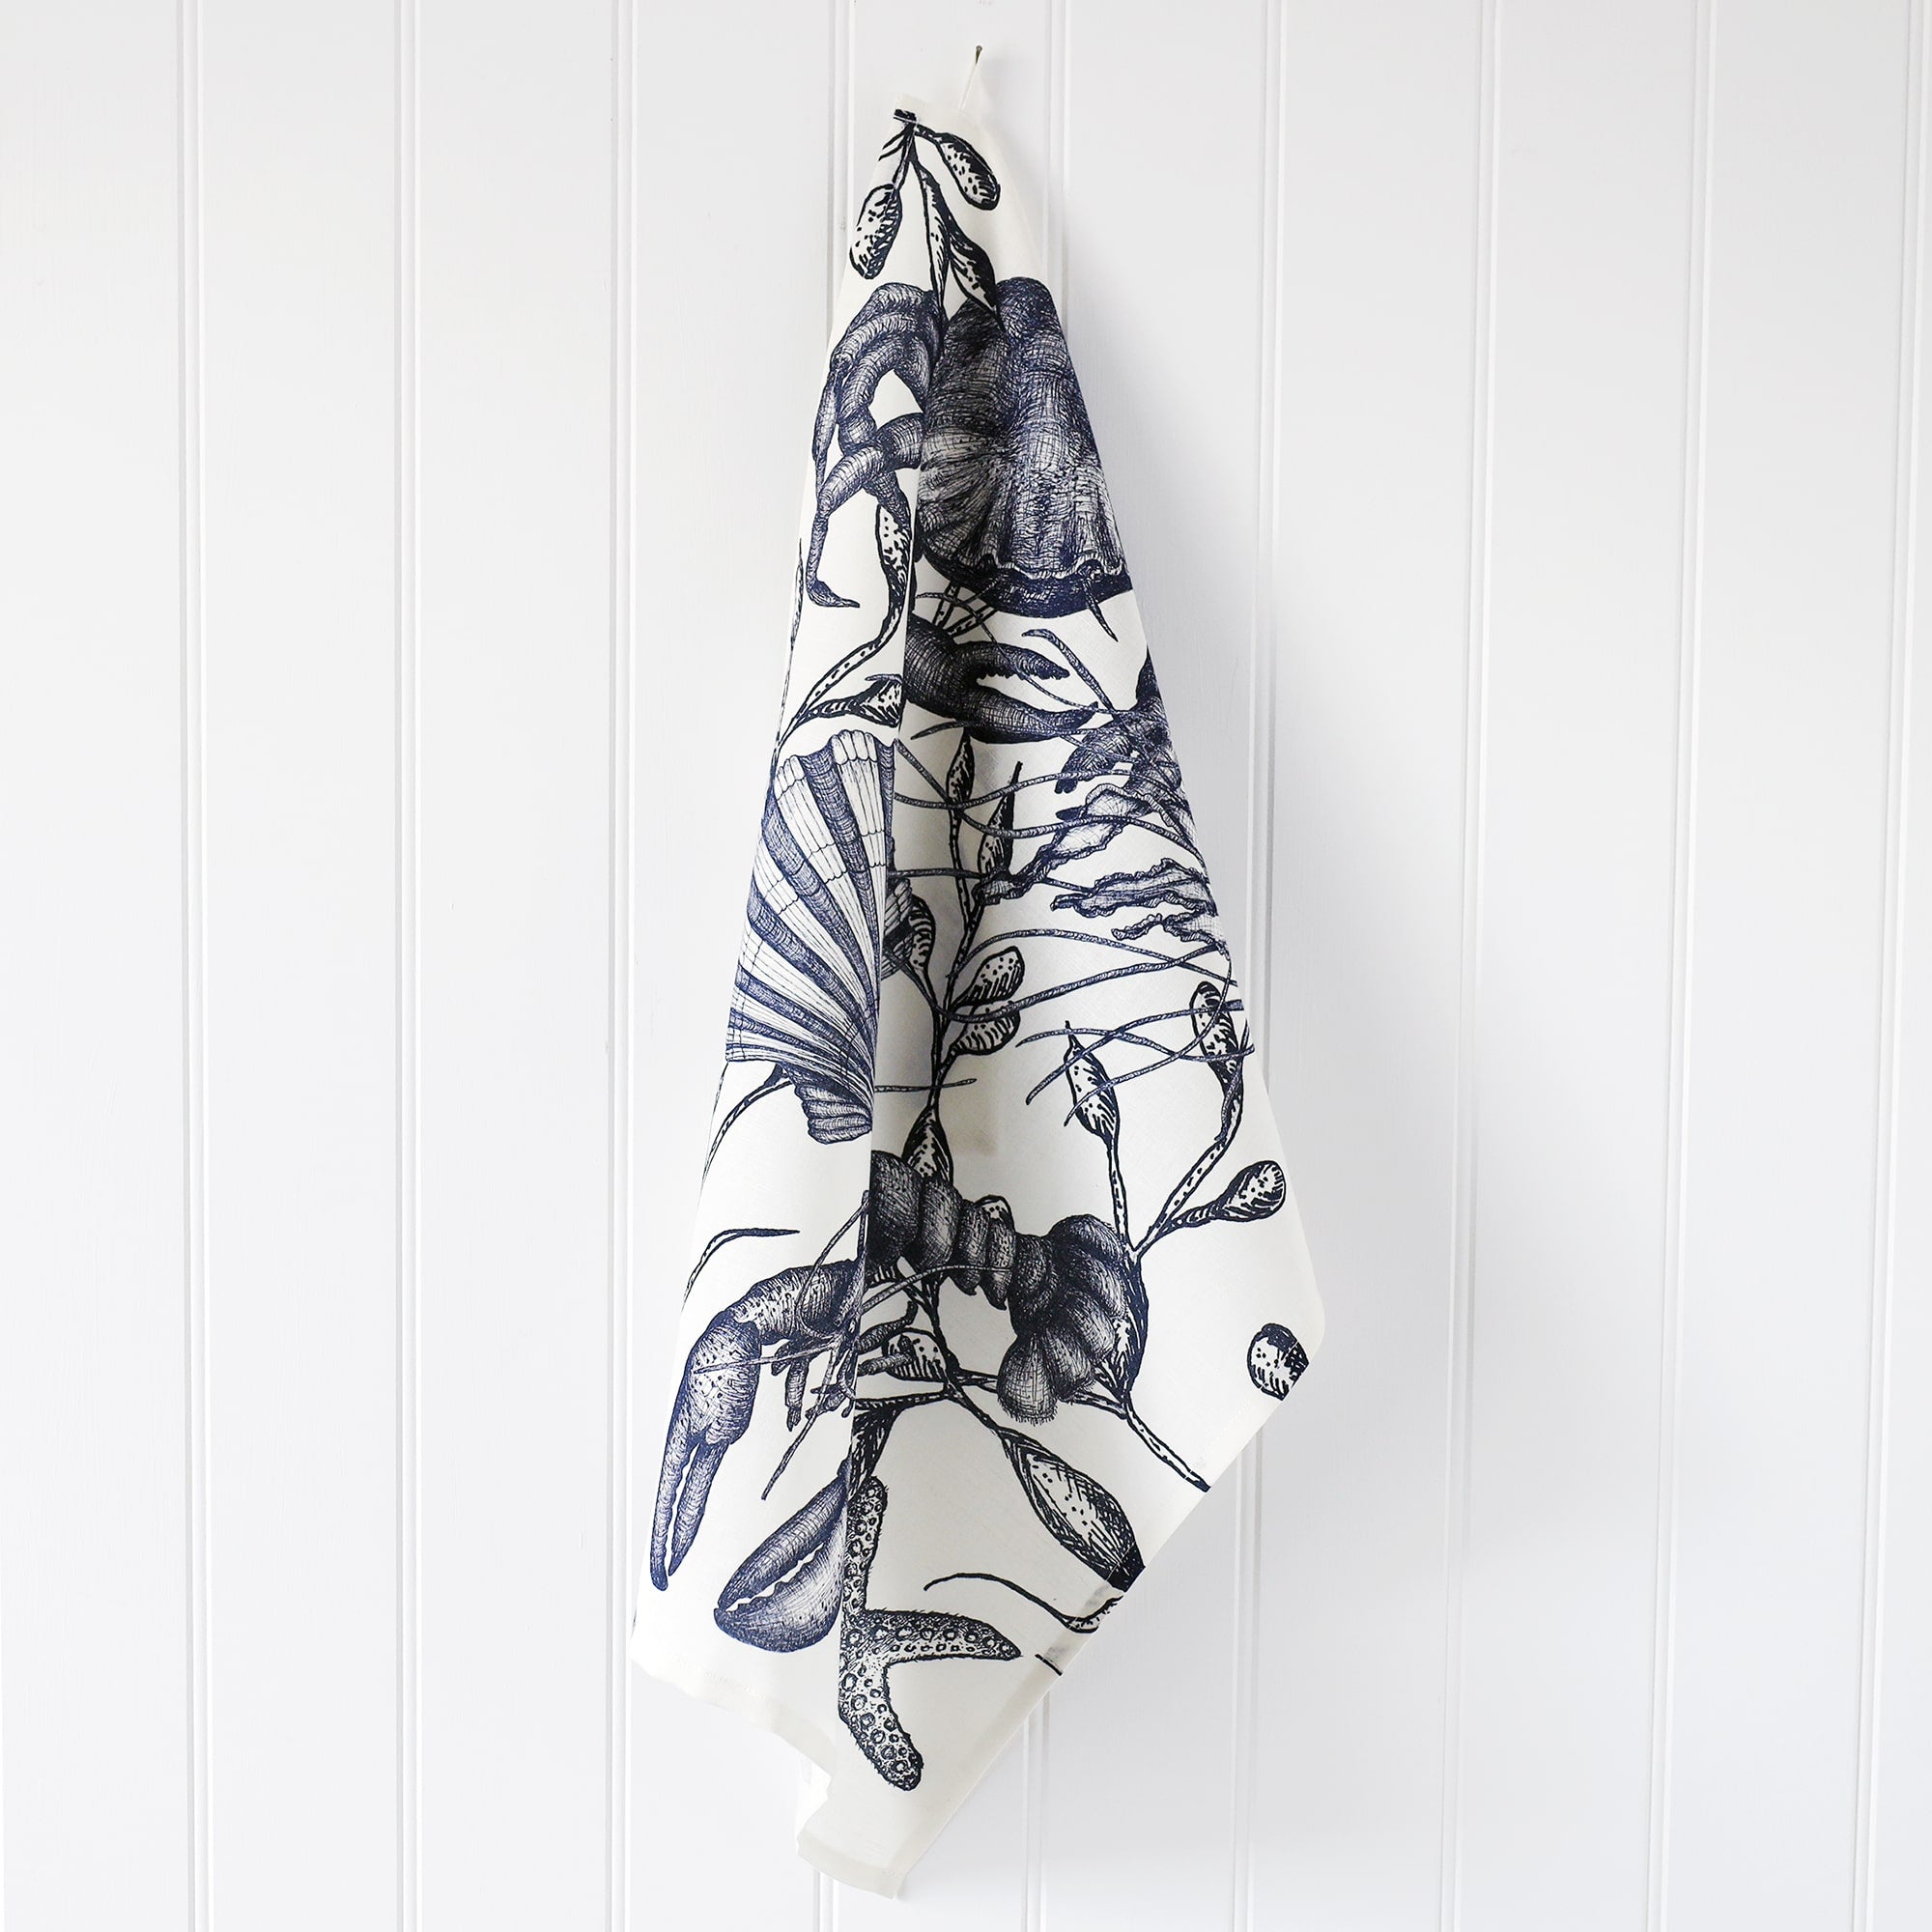 Cotton and Linen Sea Creature Tea towel decorated with hand drawn design in shades of blue on a white background,hanging from a hook